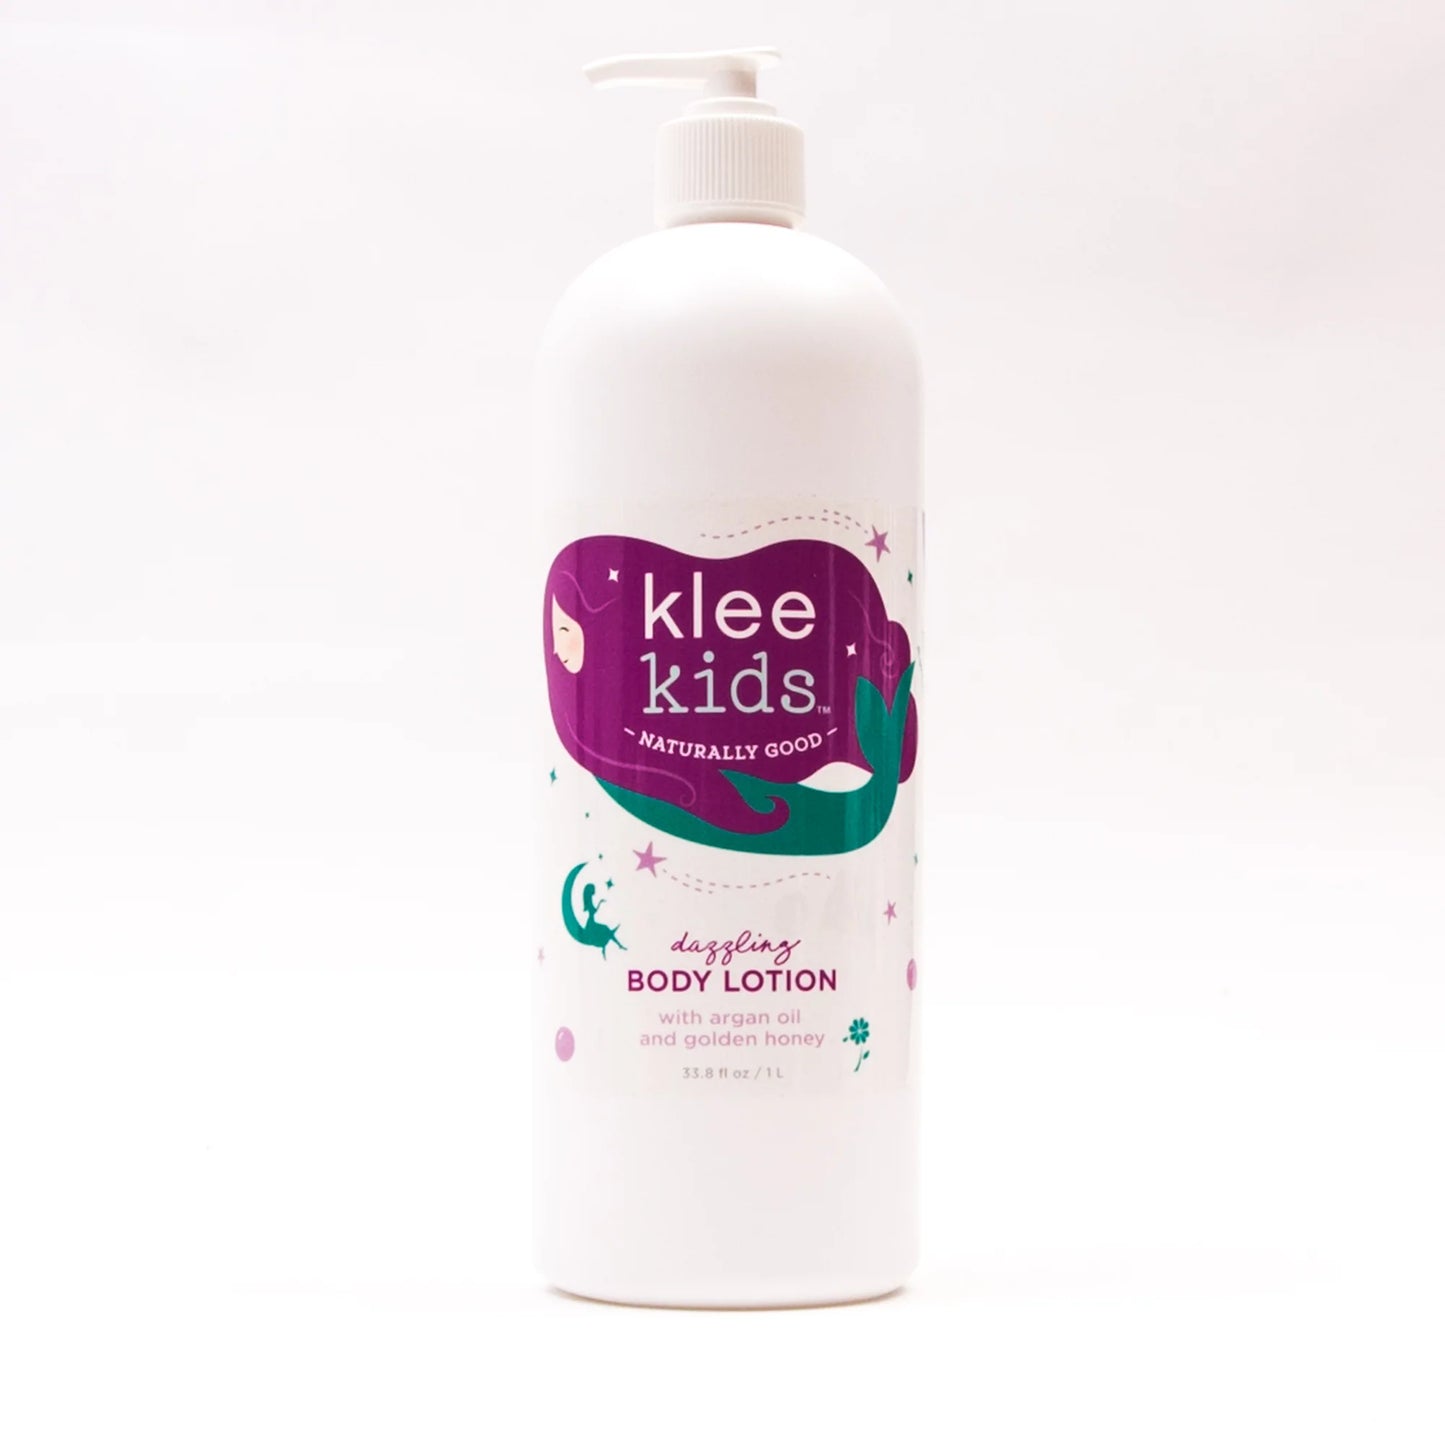 Dazzling Body Lotion for Kids with Argan Oil and Golden Honey